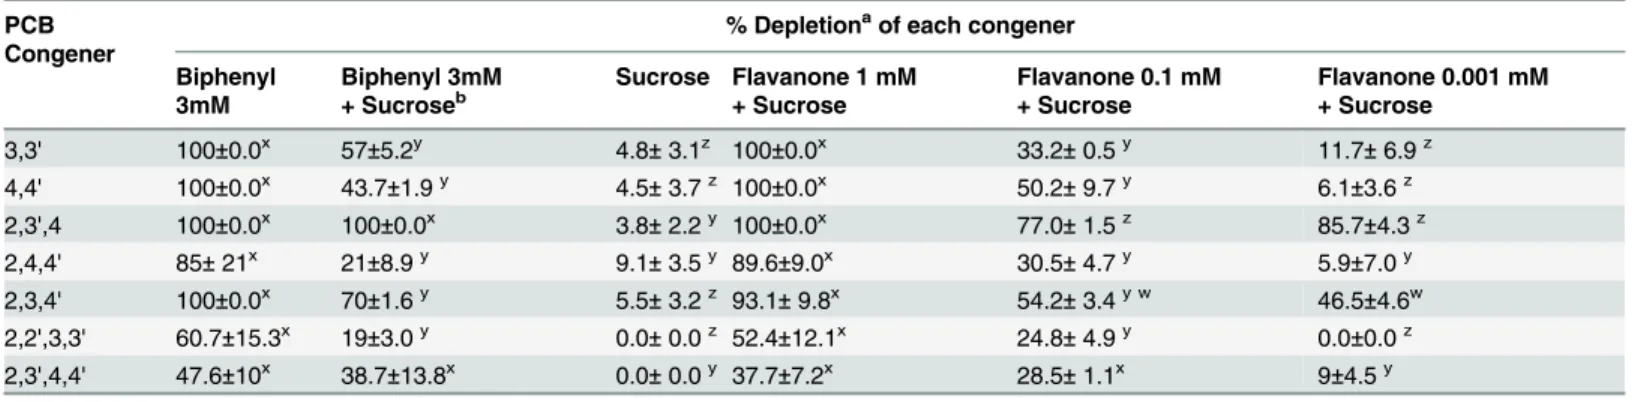 Table 7. Effect of flavanone concentration on the PCB-degrading performance of R. erythropolis U23A.